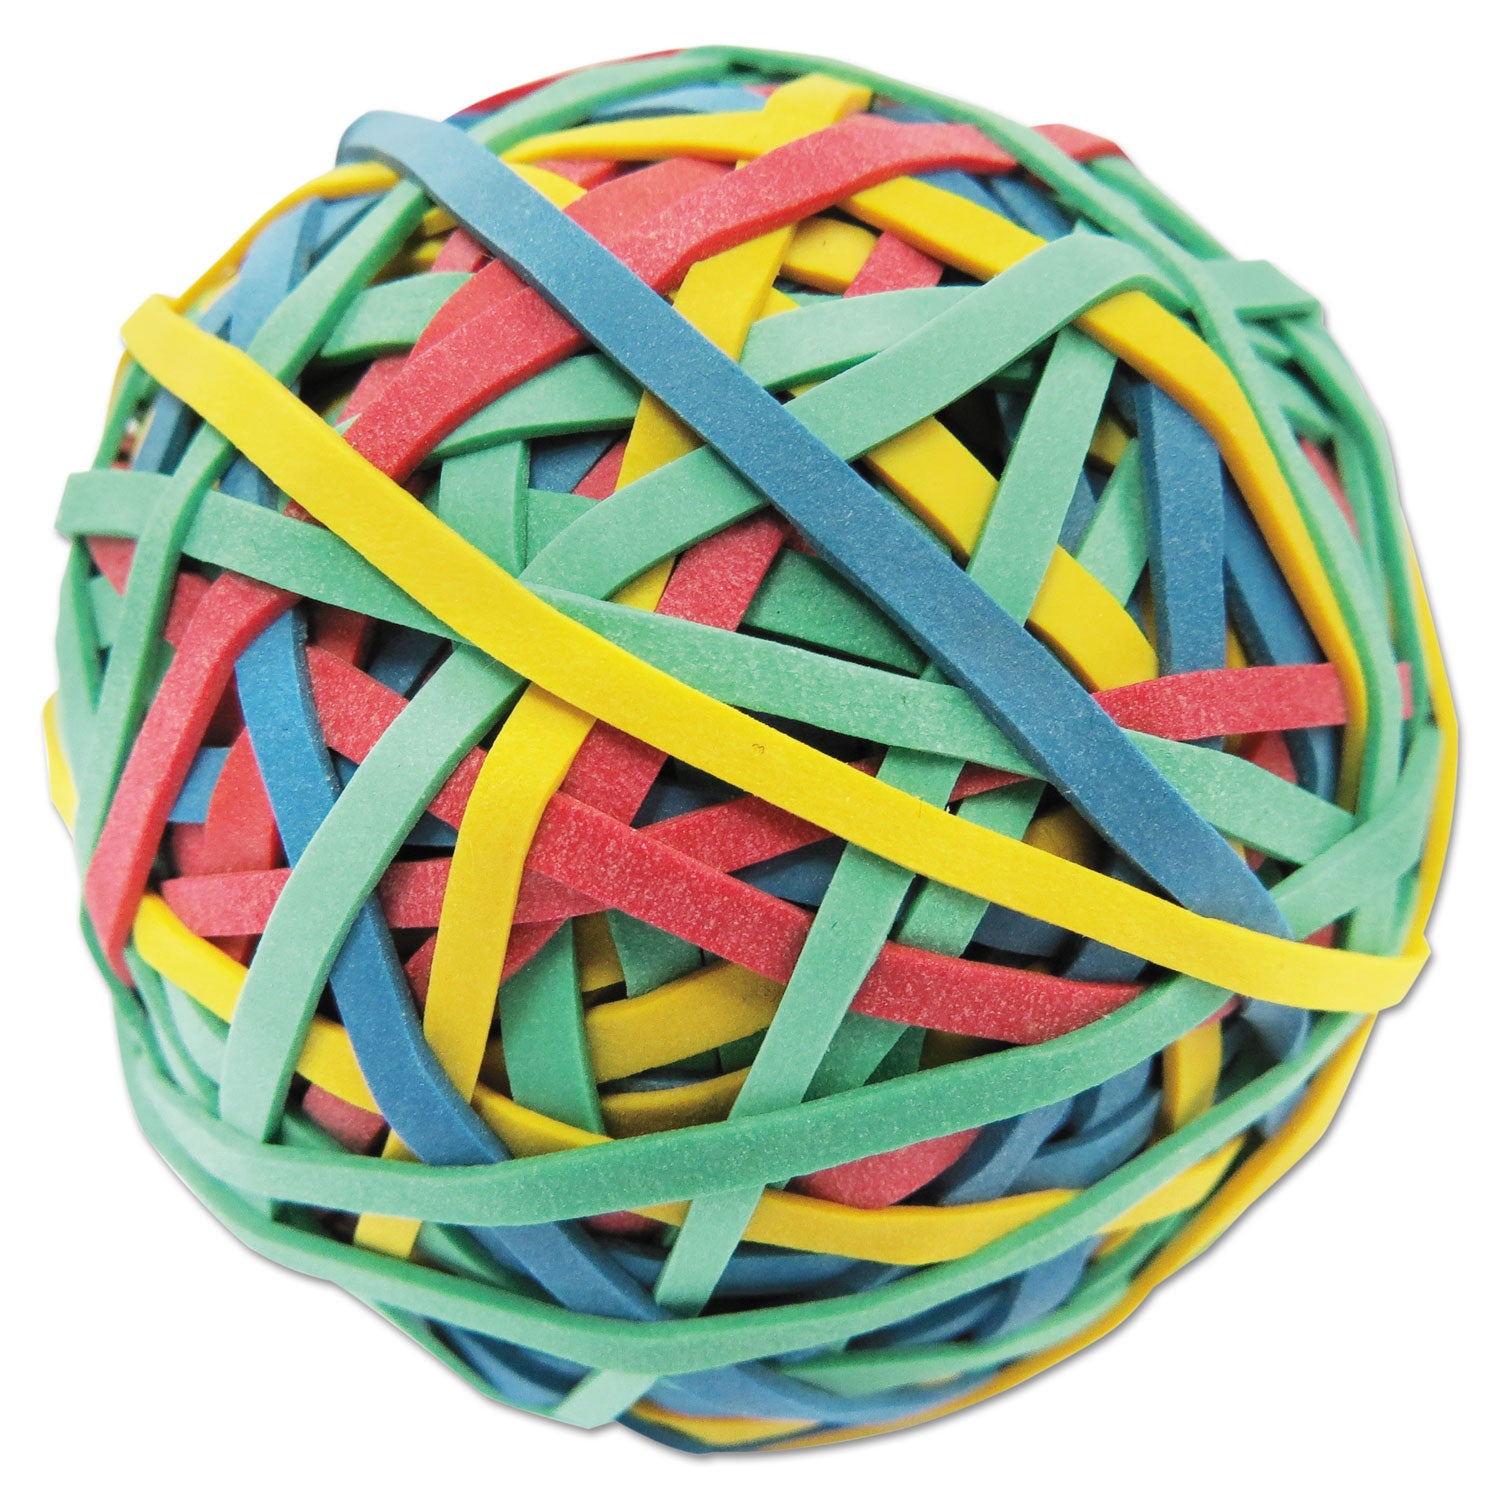 rubber-band-ball-3-diameter-size-32-assorted-colors-260-pack_unv00460 - 1